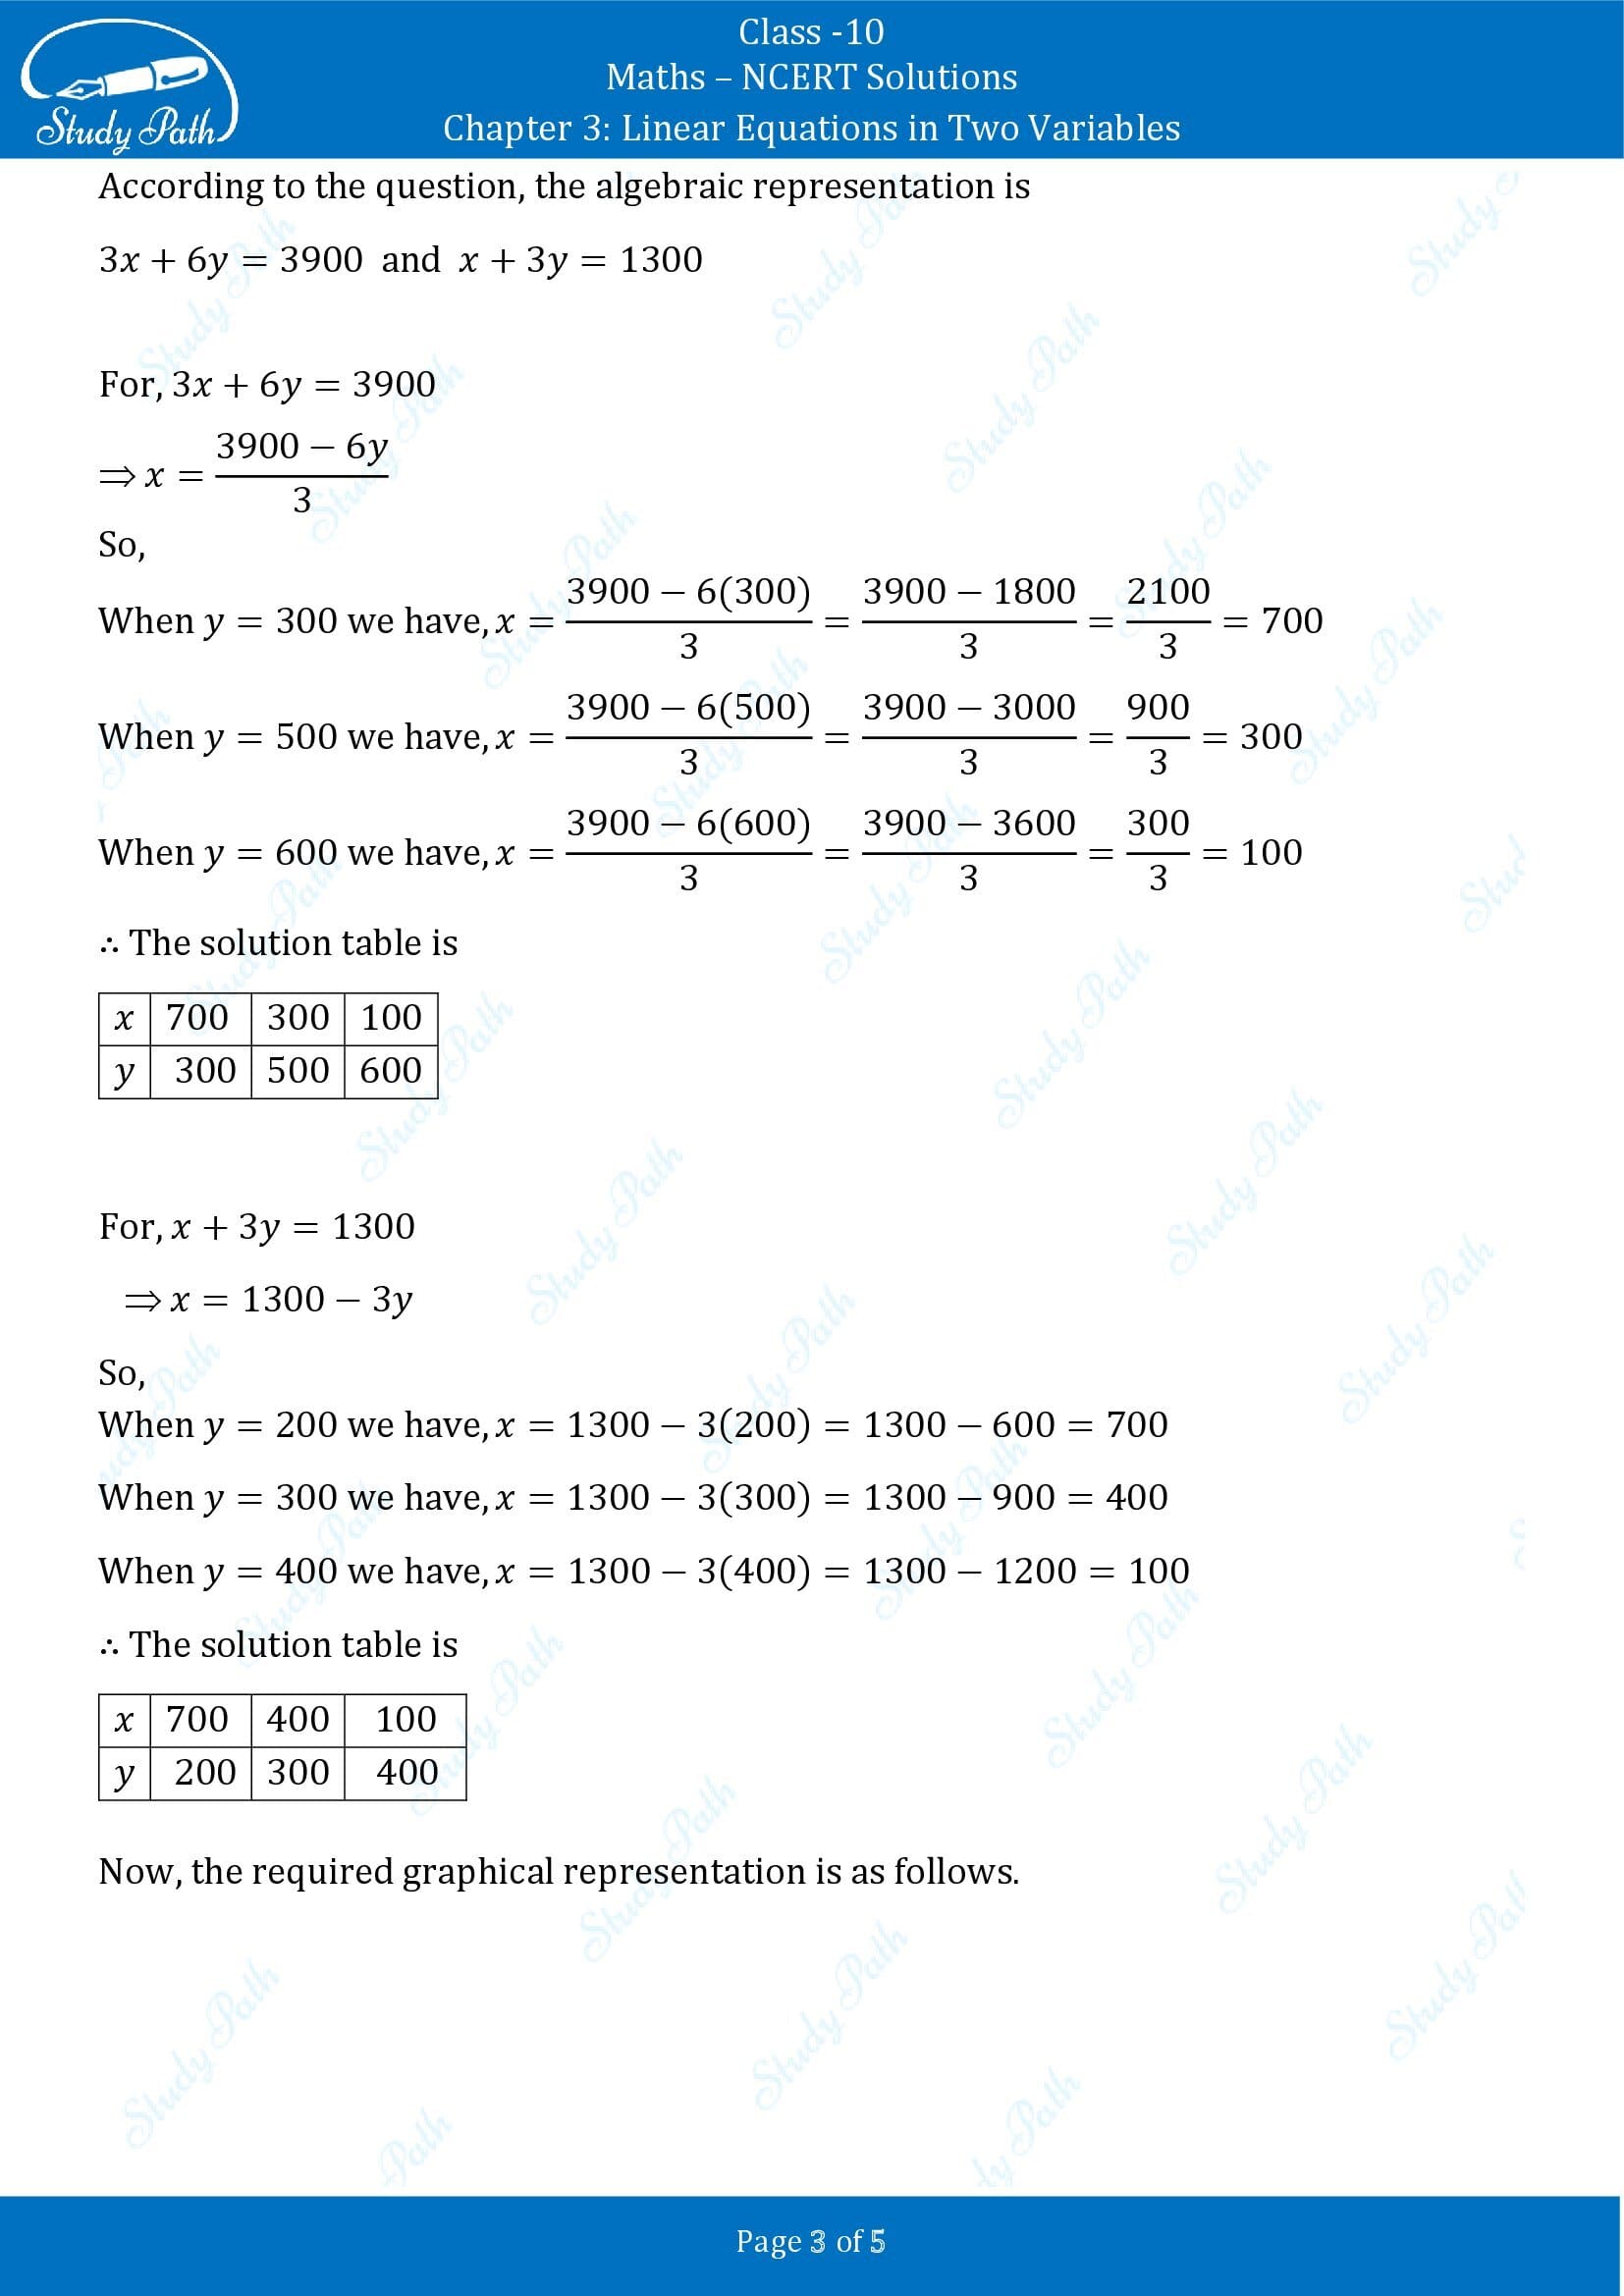 NCERT Solutions for Class 10 Maths Chapter 3 Linear Equations in Two Variables Exercise 3.1 00003